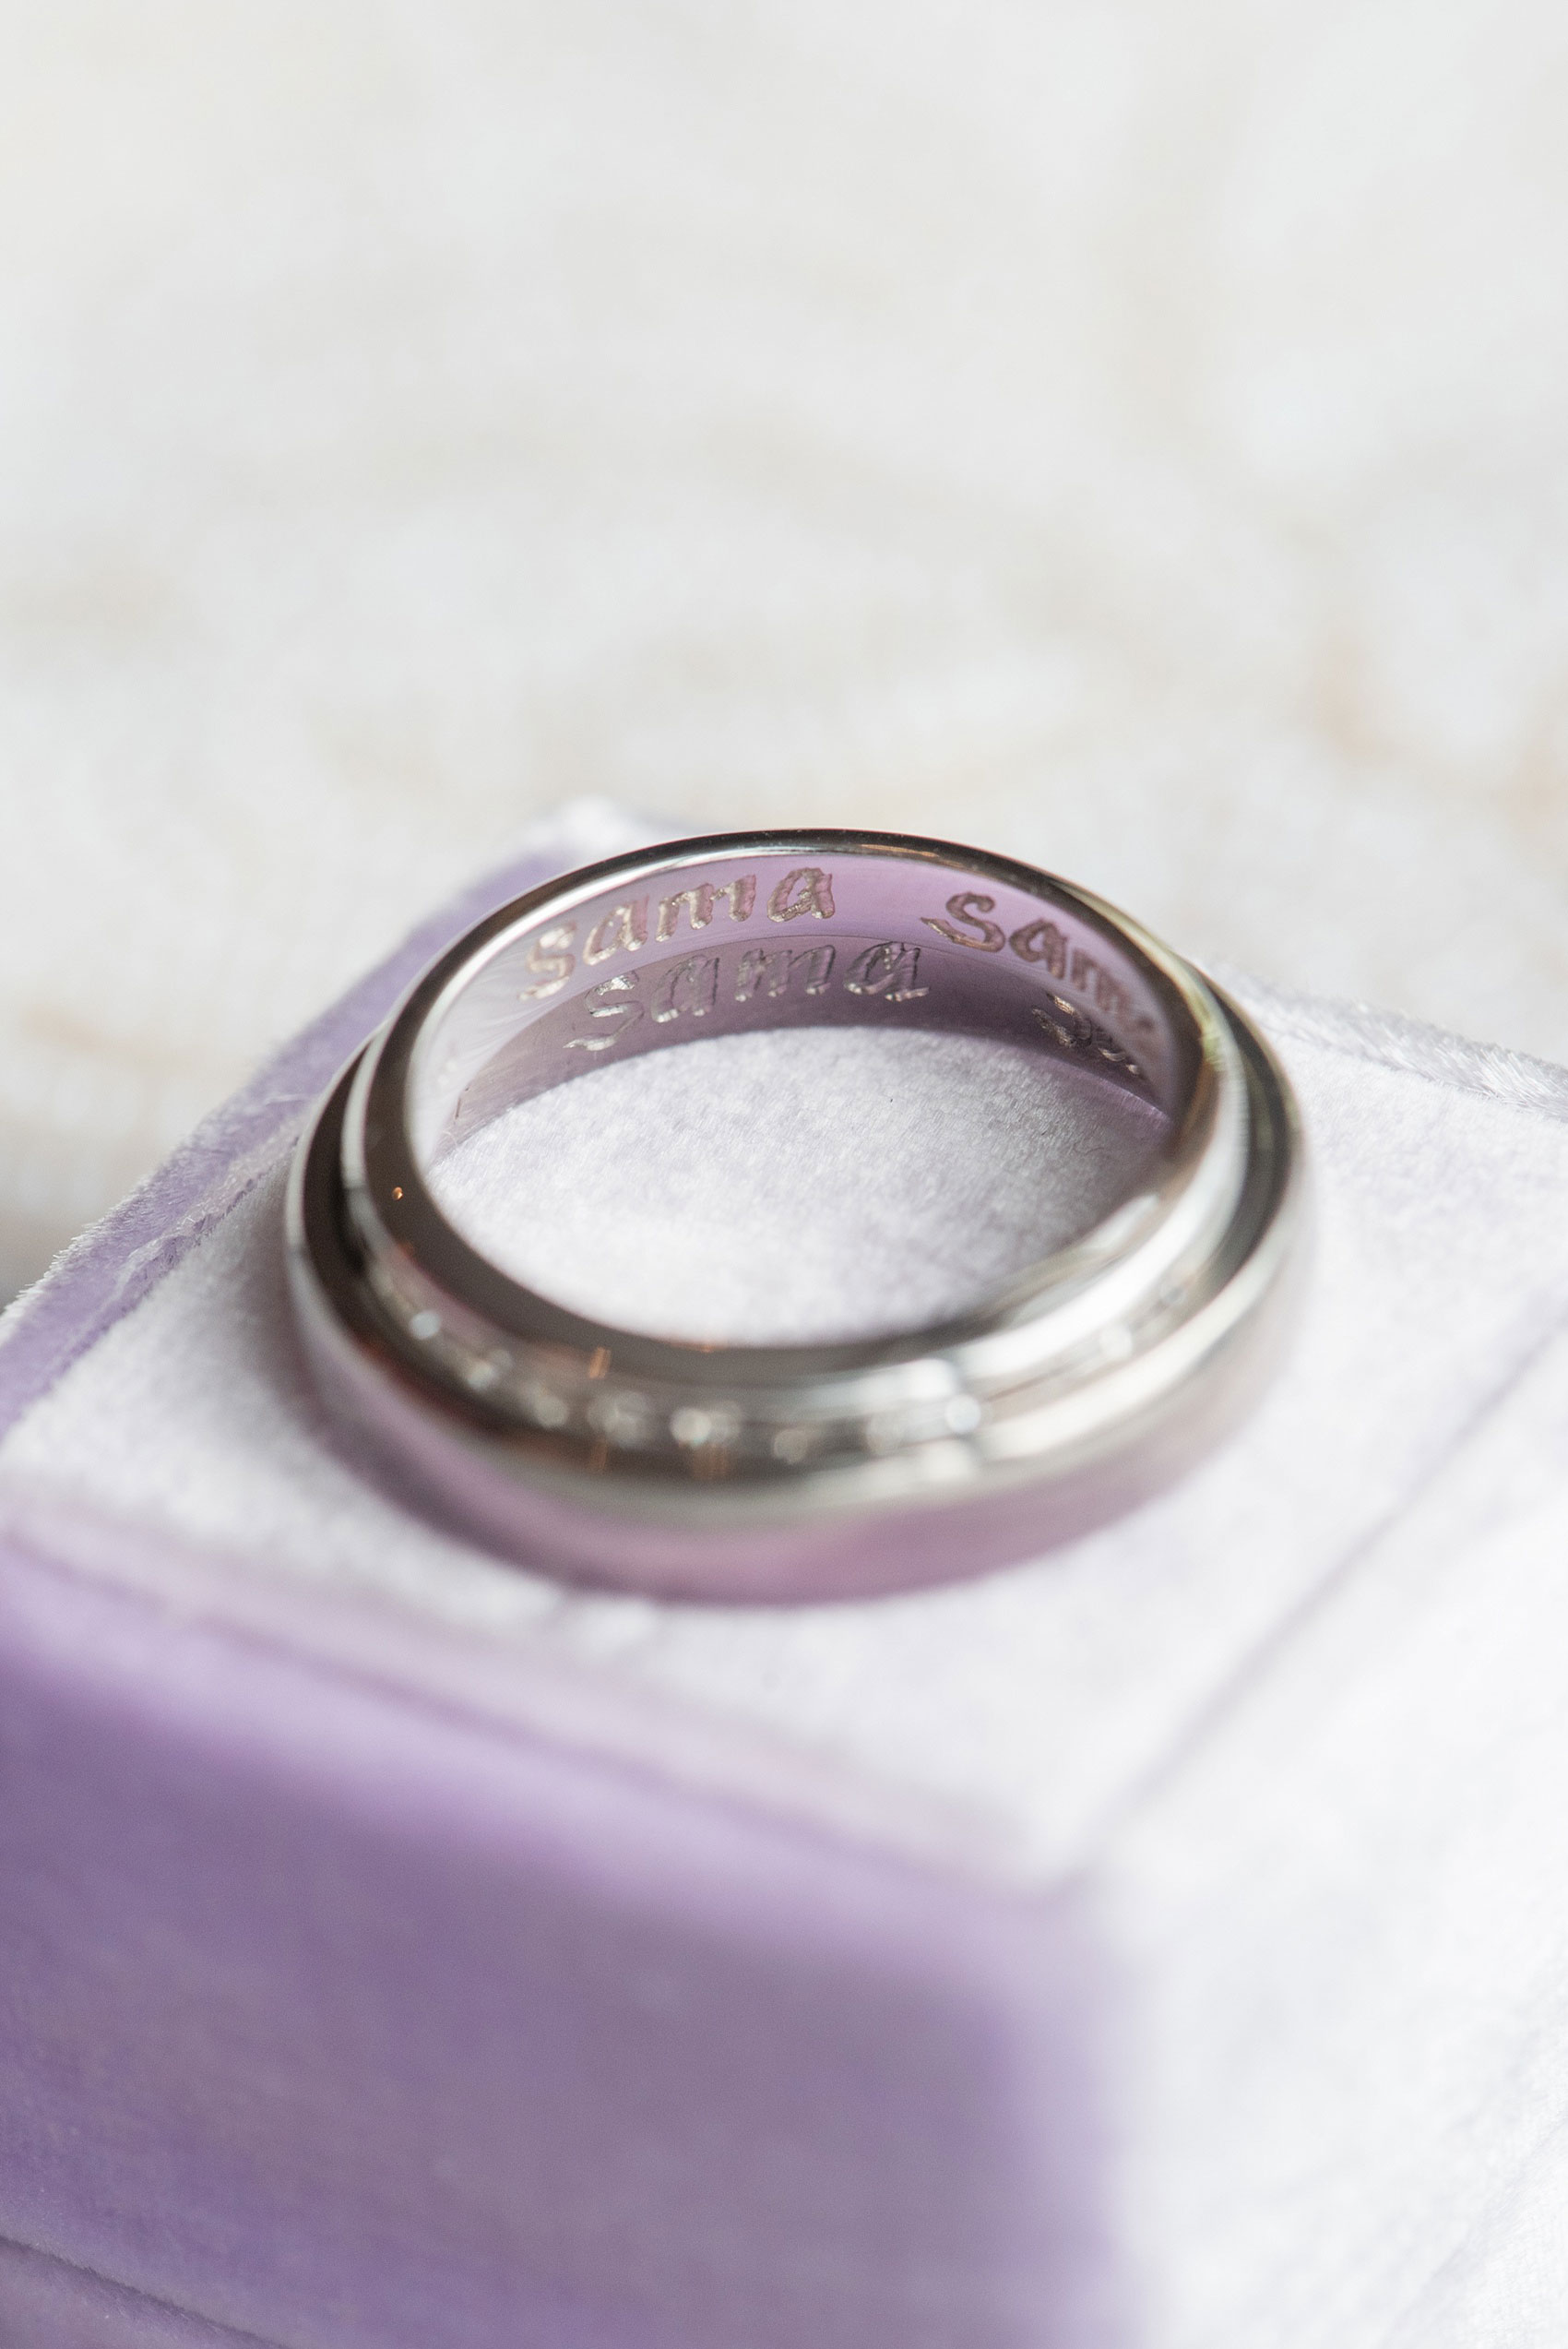 Mikkel Paige Photography photos of a NYC wedding at Tribeca Rooftop. An image of the inscription in the white gold wedding bands.